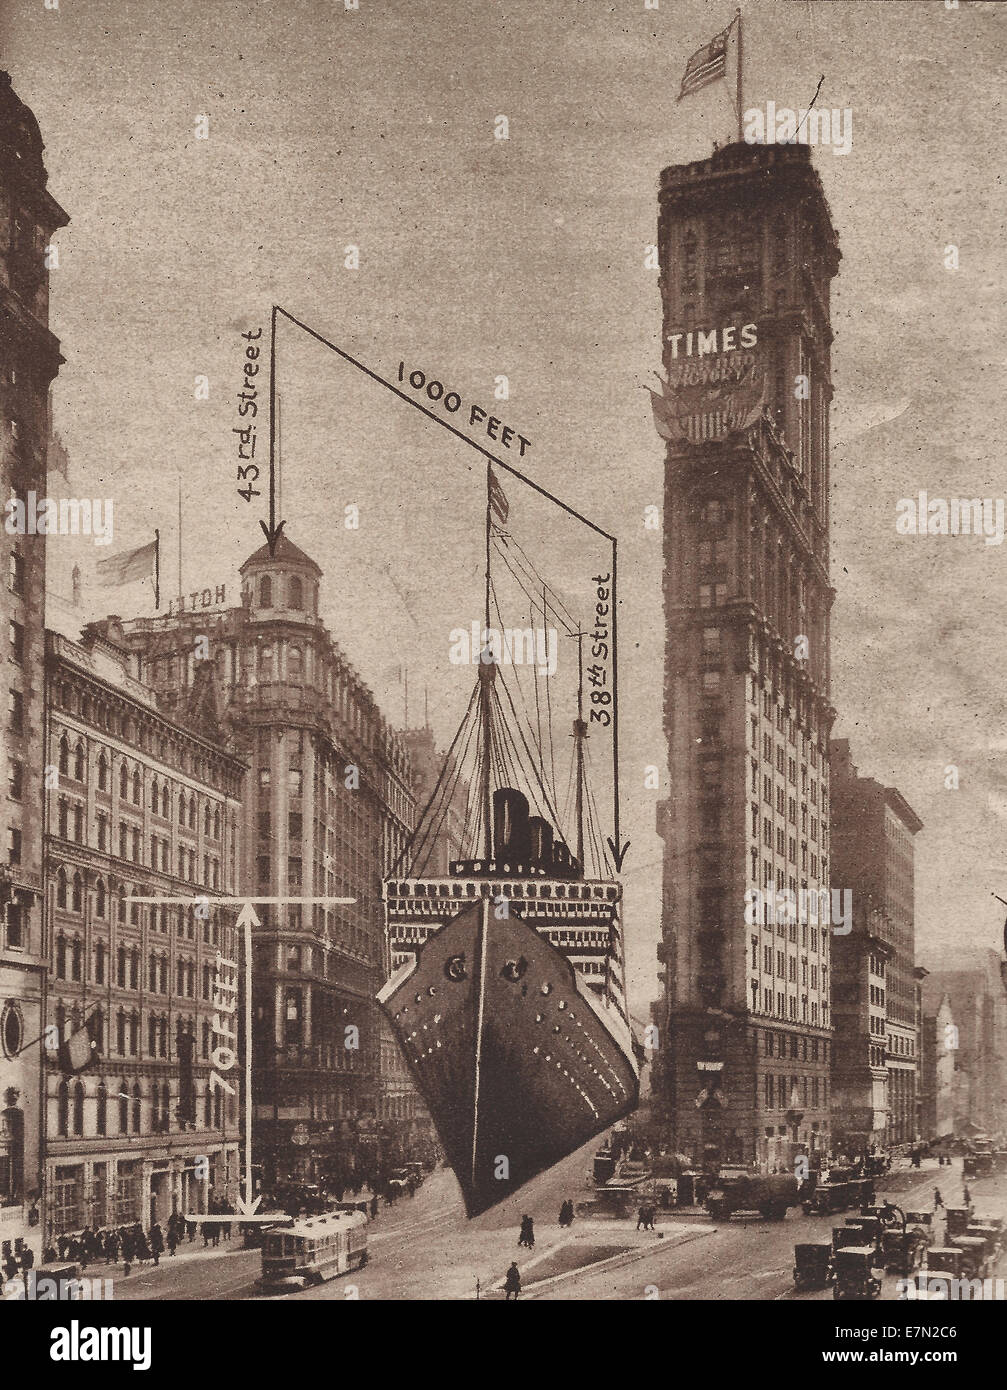 One of the new Ocean steamers recently projected would extend along Broadway, New York from the Times Corner at 43rd St to 38th Street, circa 1919 Stock Photo